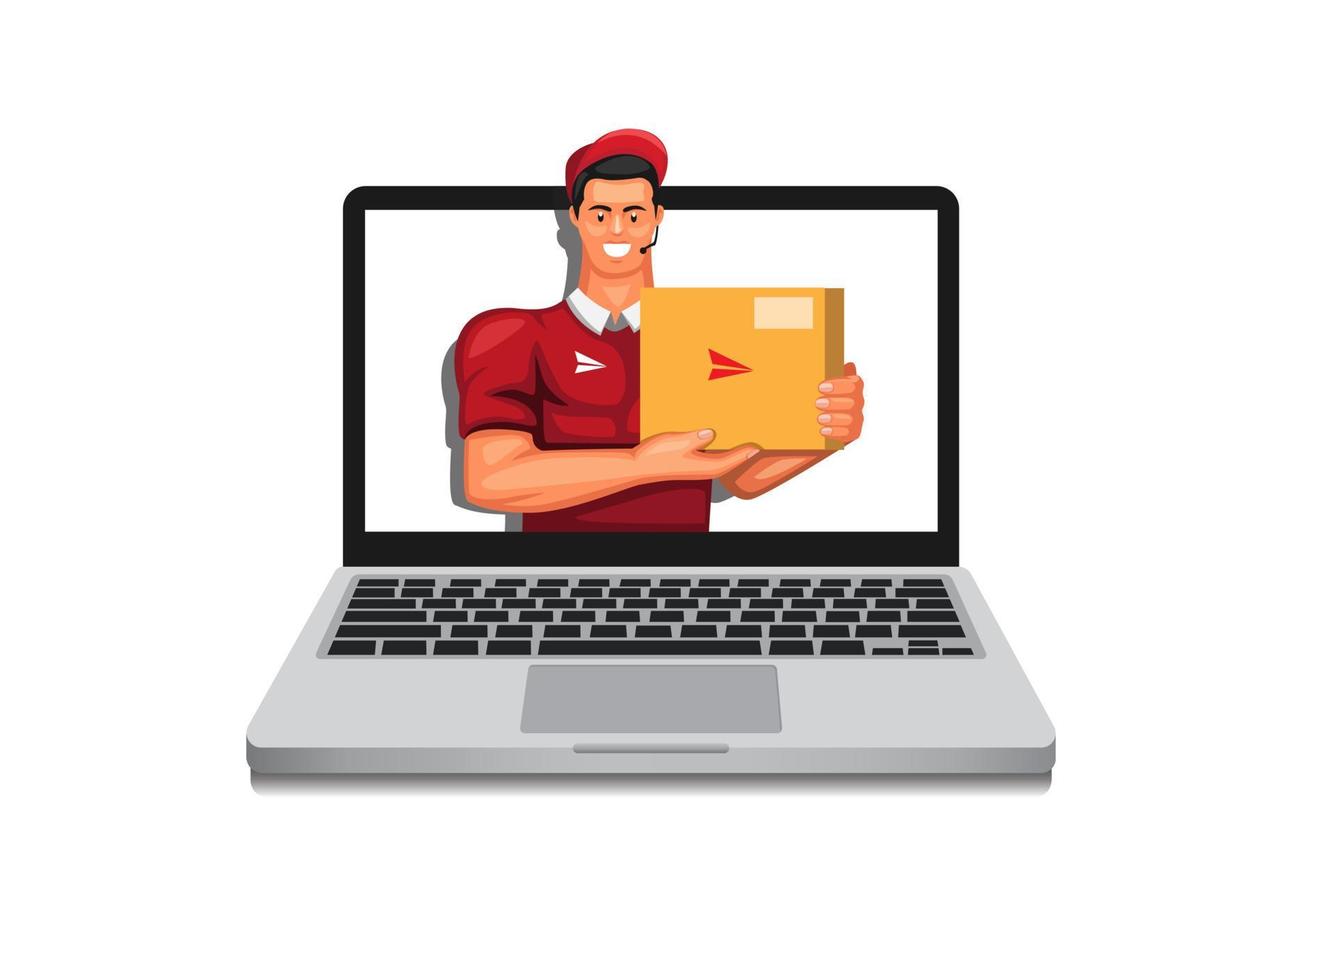 Courier Package out from laptop. online shopping delivery service symbol concept in cartoon illustration vector